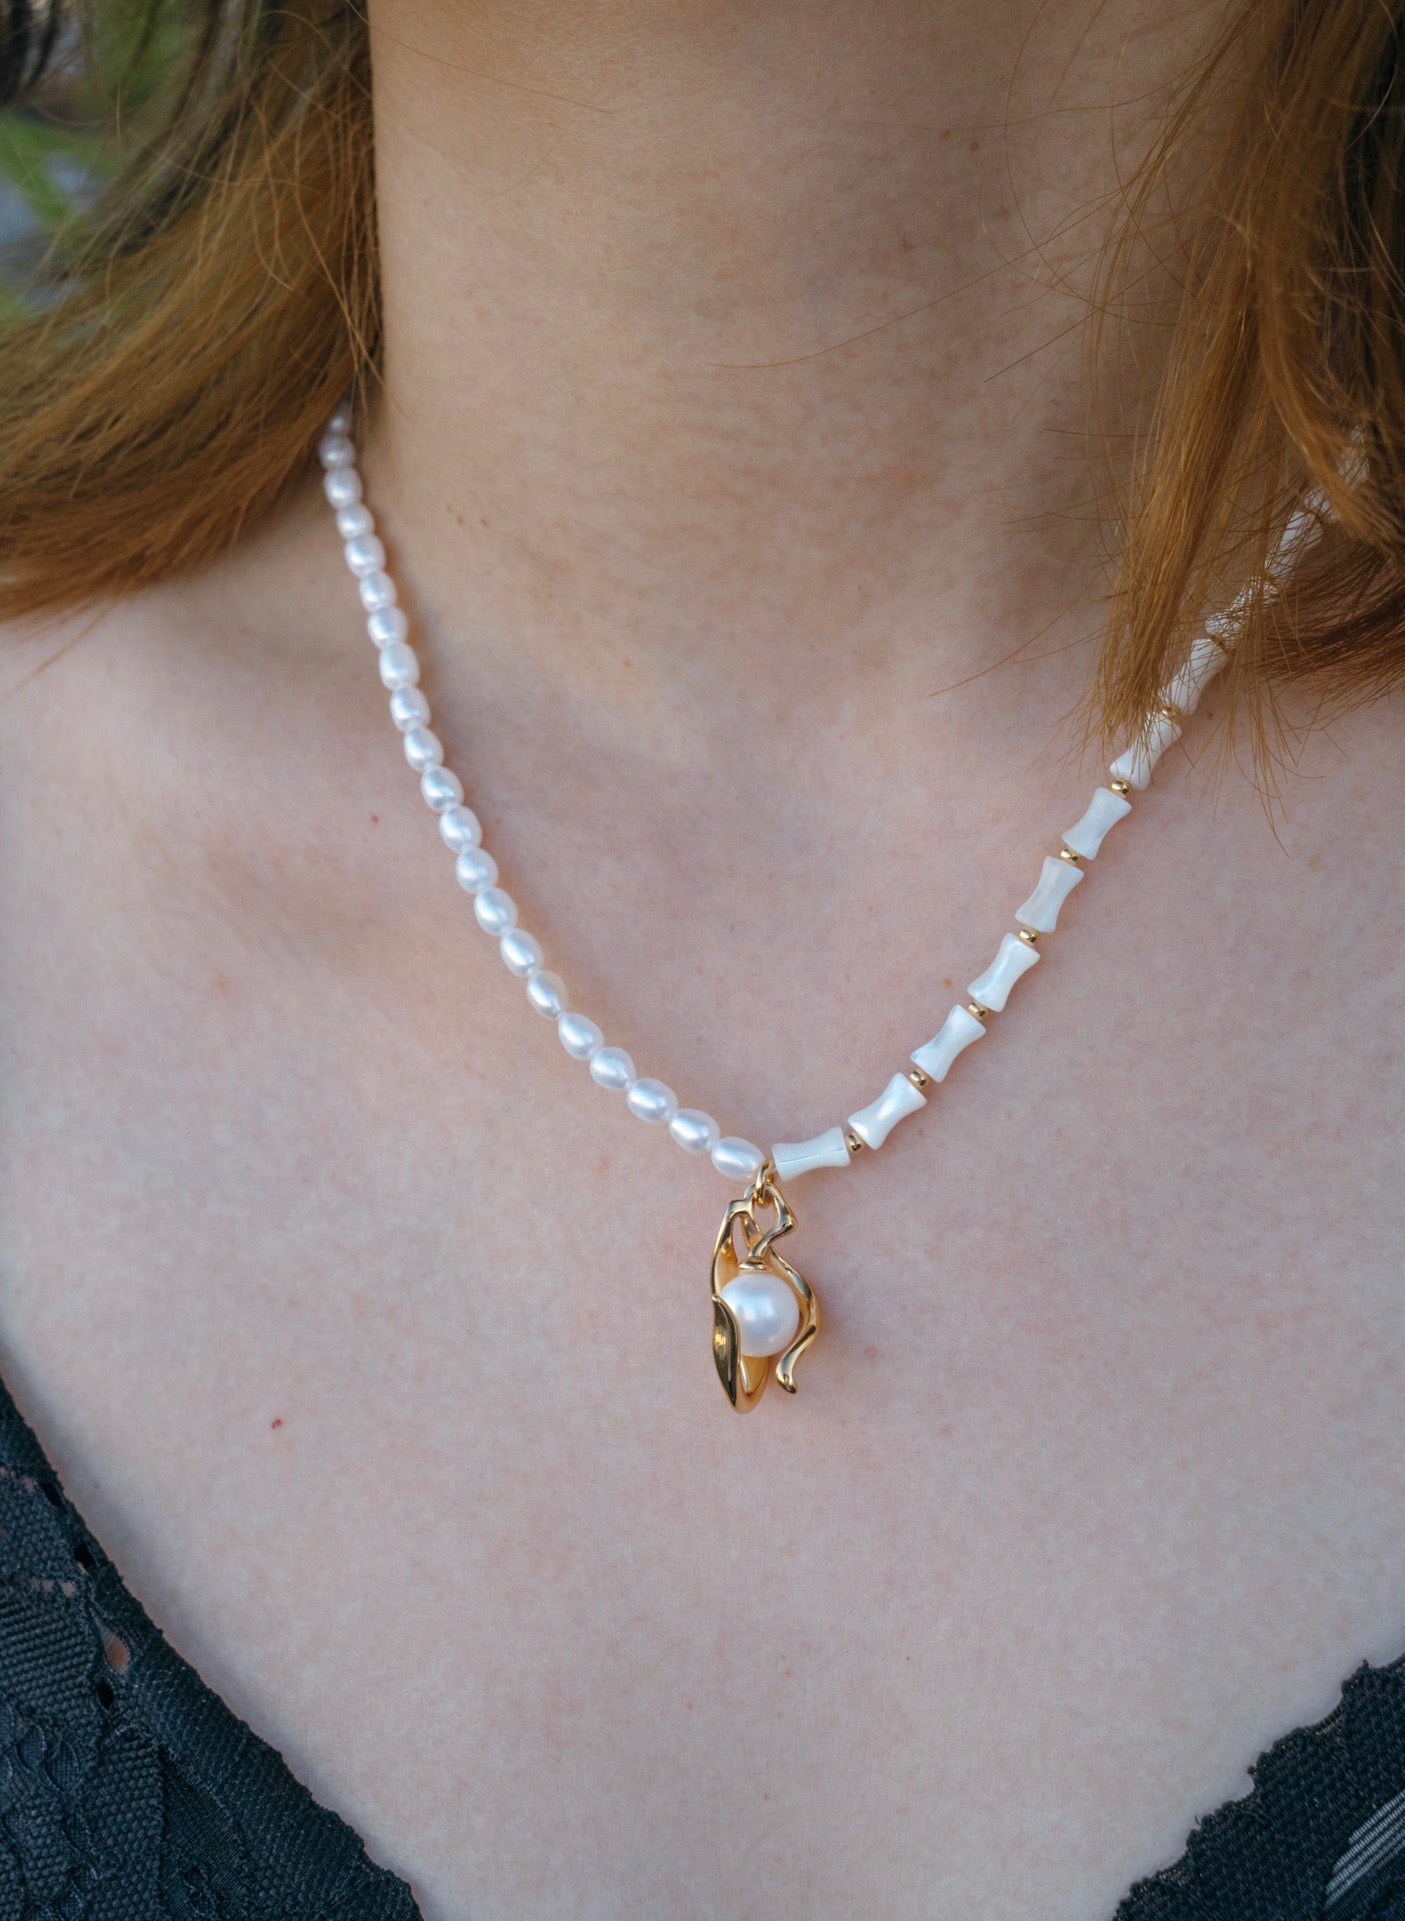 Bamboo Symphony Necklace, a true masterpiece of grace and elegance. Crafted with love, this necklace features a beautiful Bamboo Knot design adorned with a lustrous pearl. 